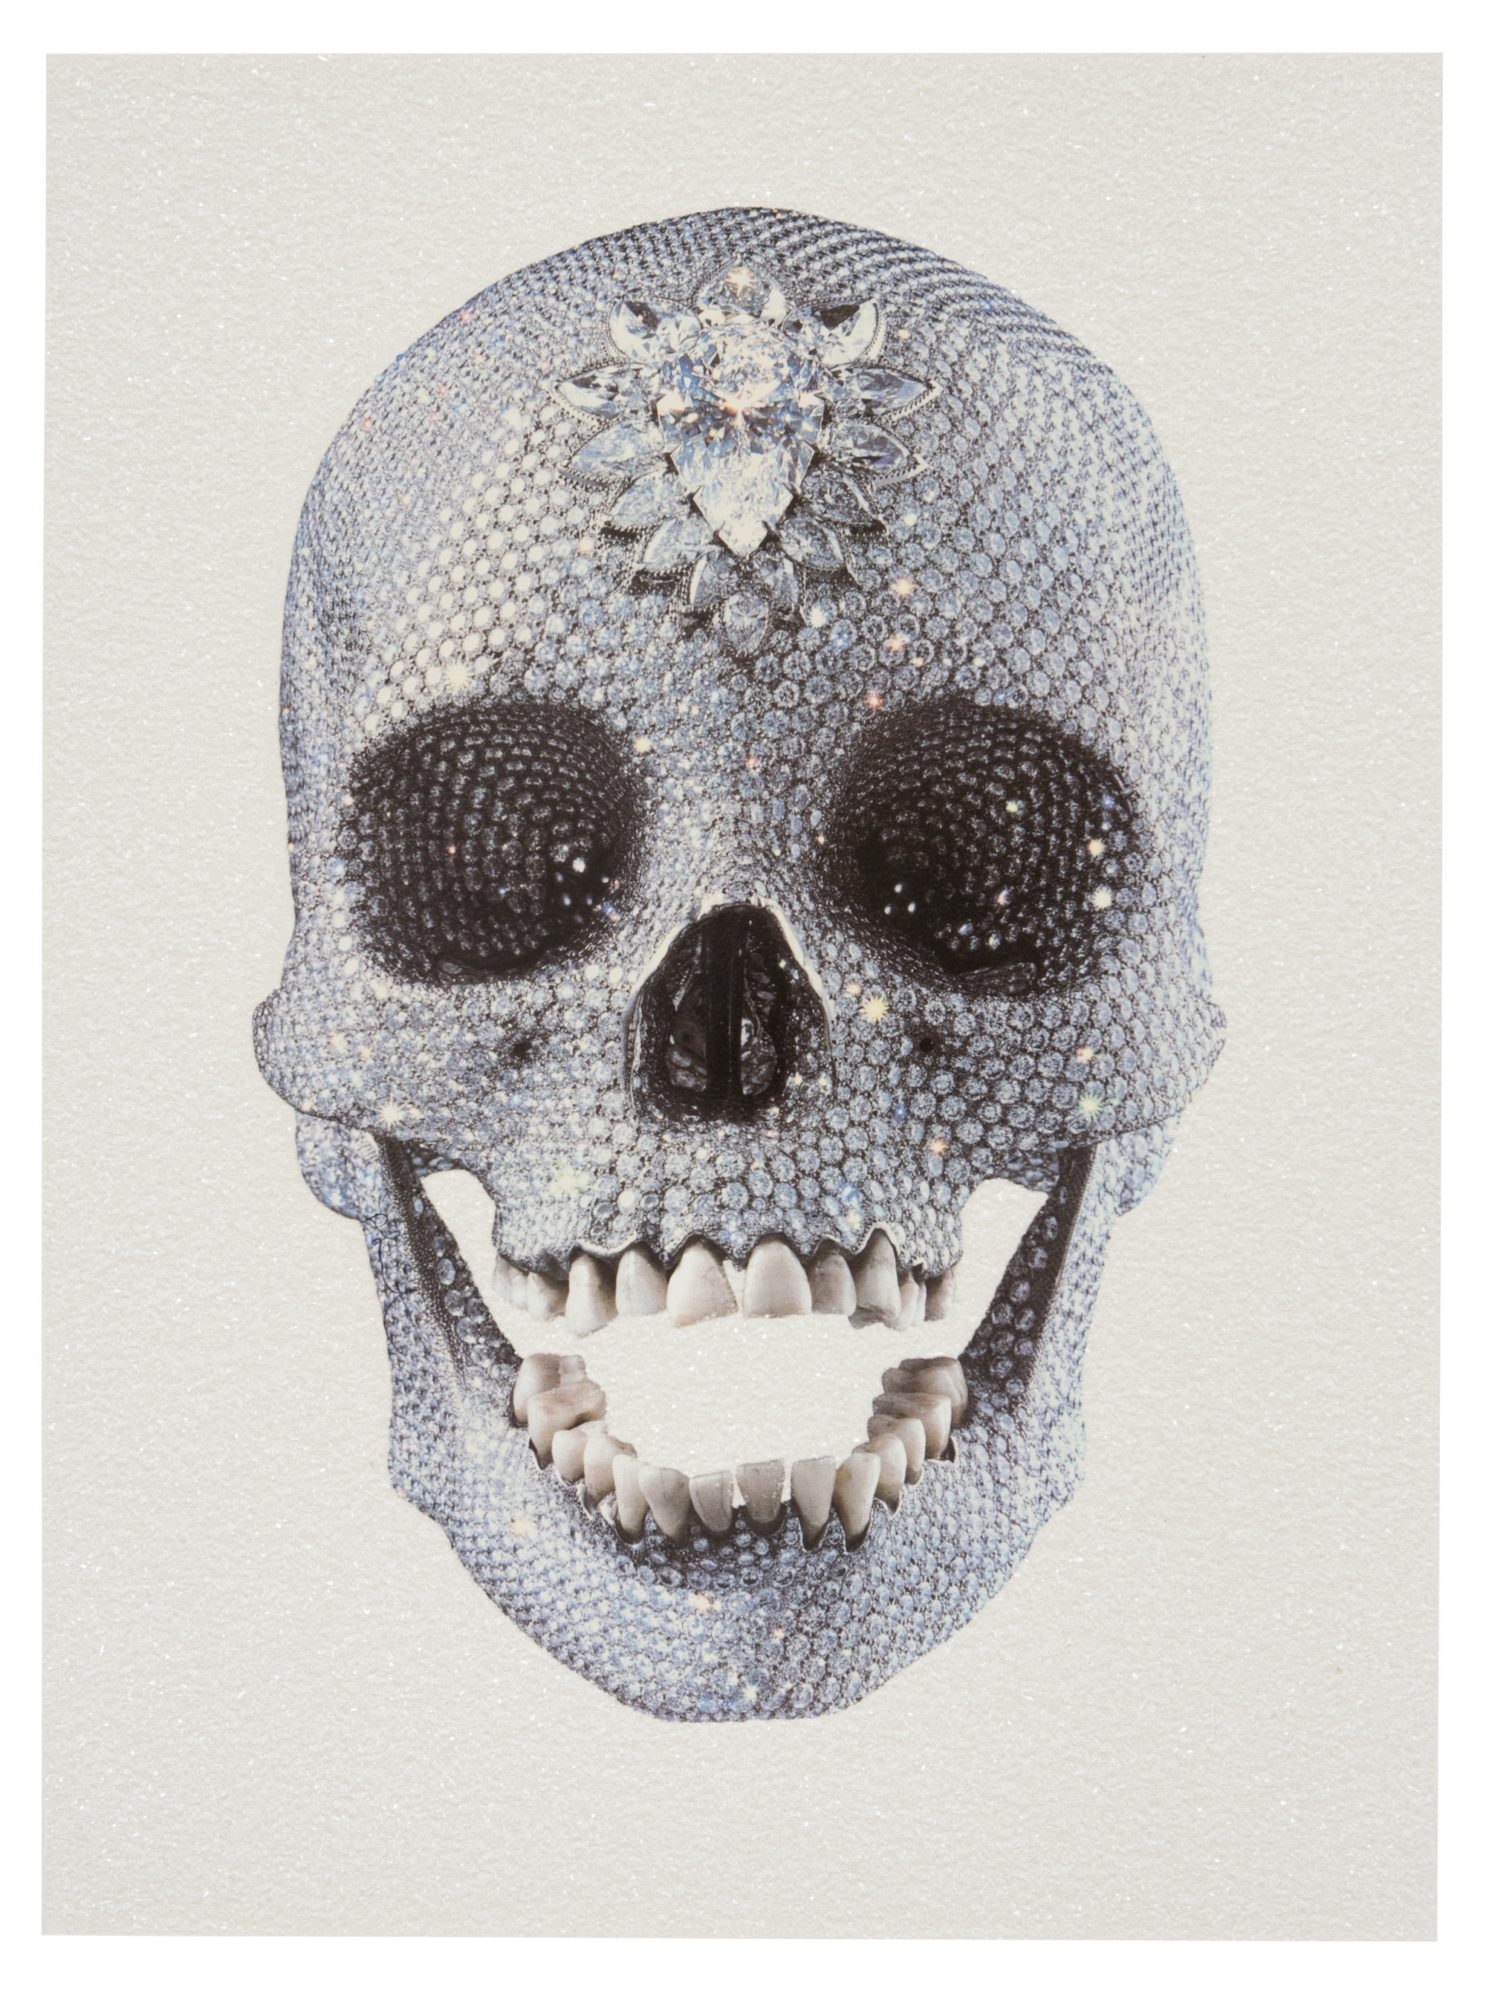 Damien Hirst - For The Love of God (White)